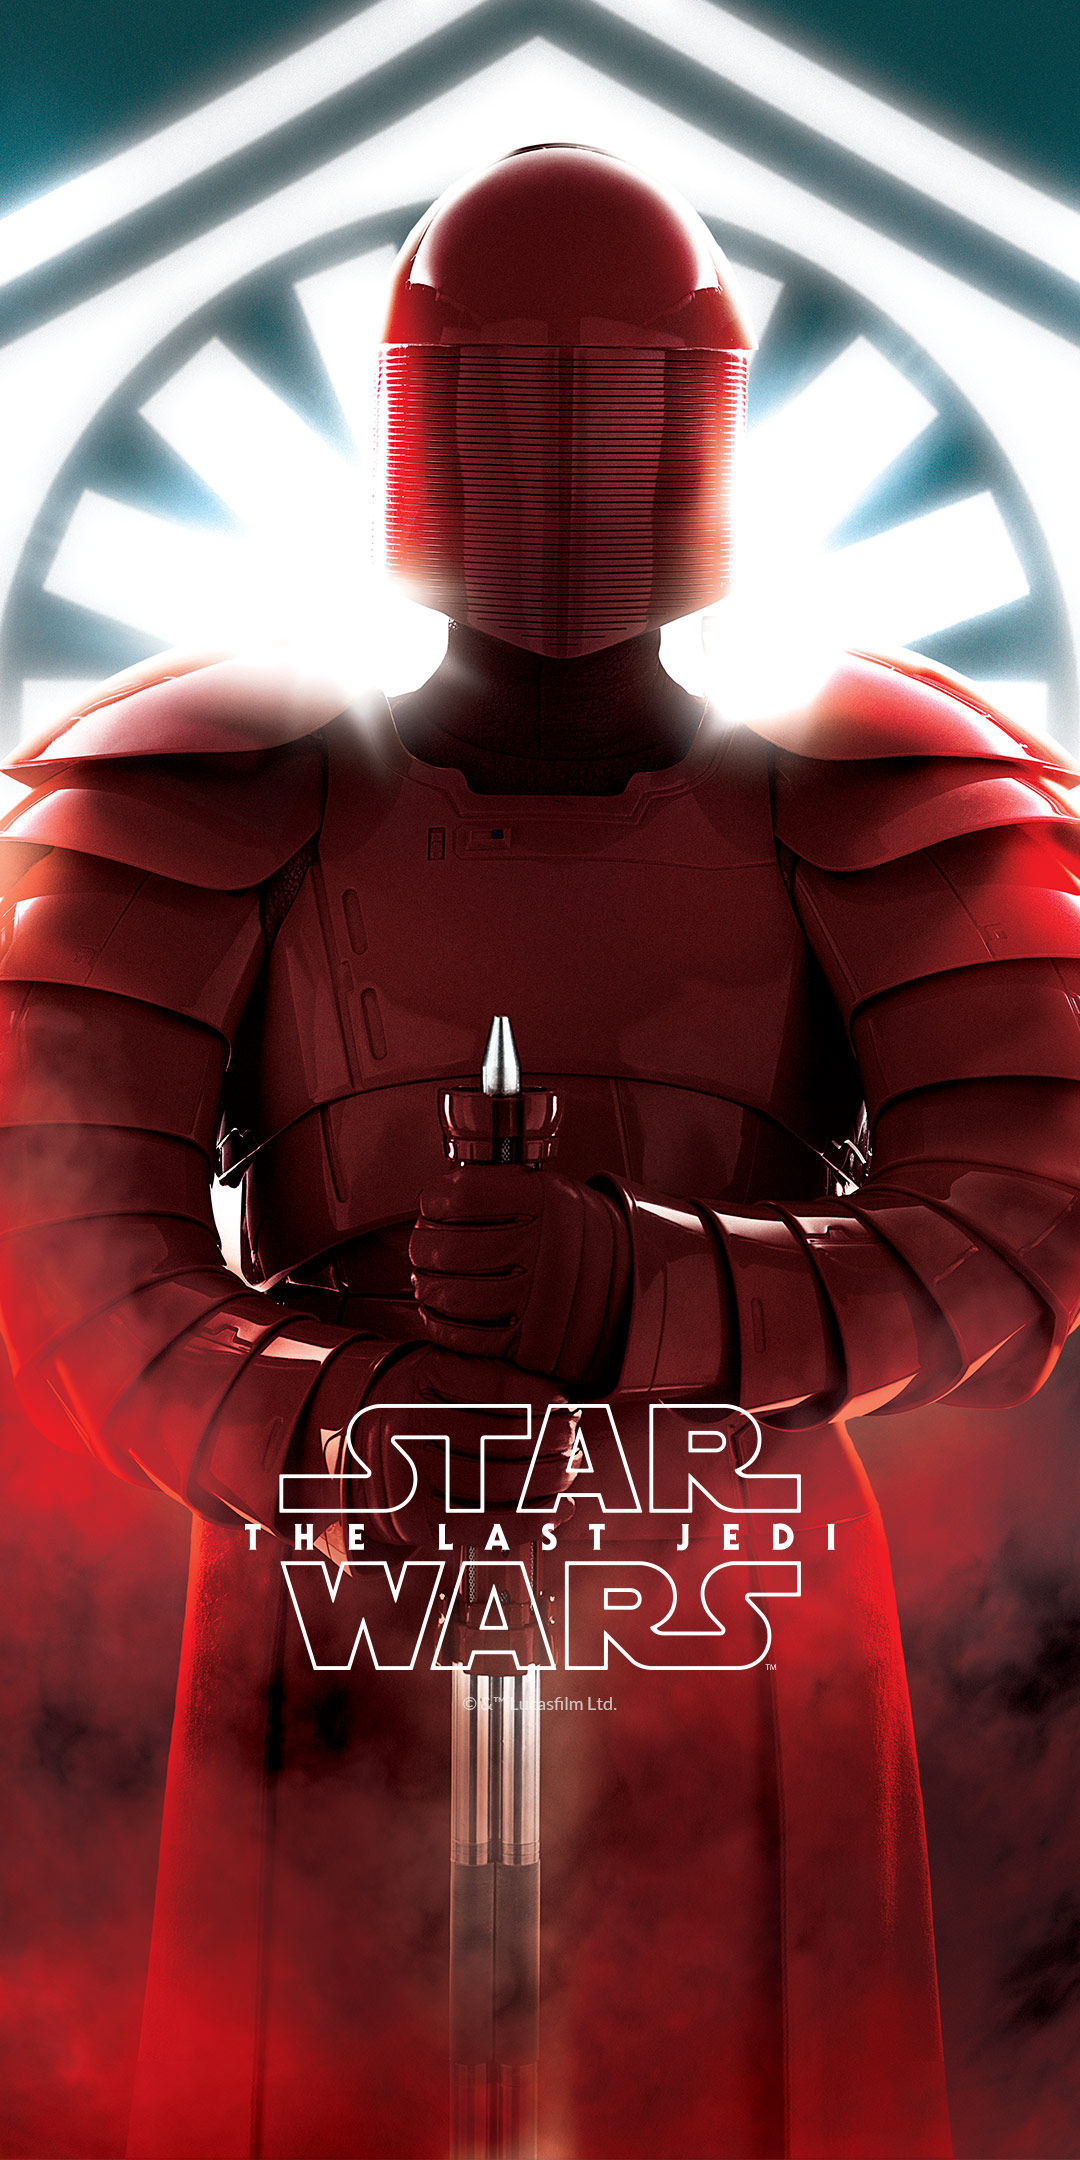 Get all the Star Wars: The Last Jedi wallpaper from the special edition OnePlus 5T [Download]. Star wars wallpaper, Star wars picture, Star wars poster